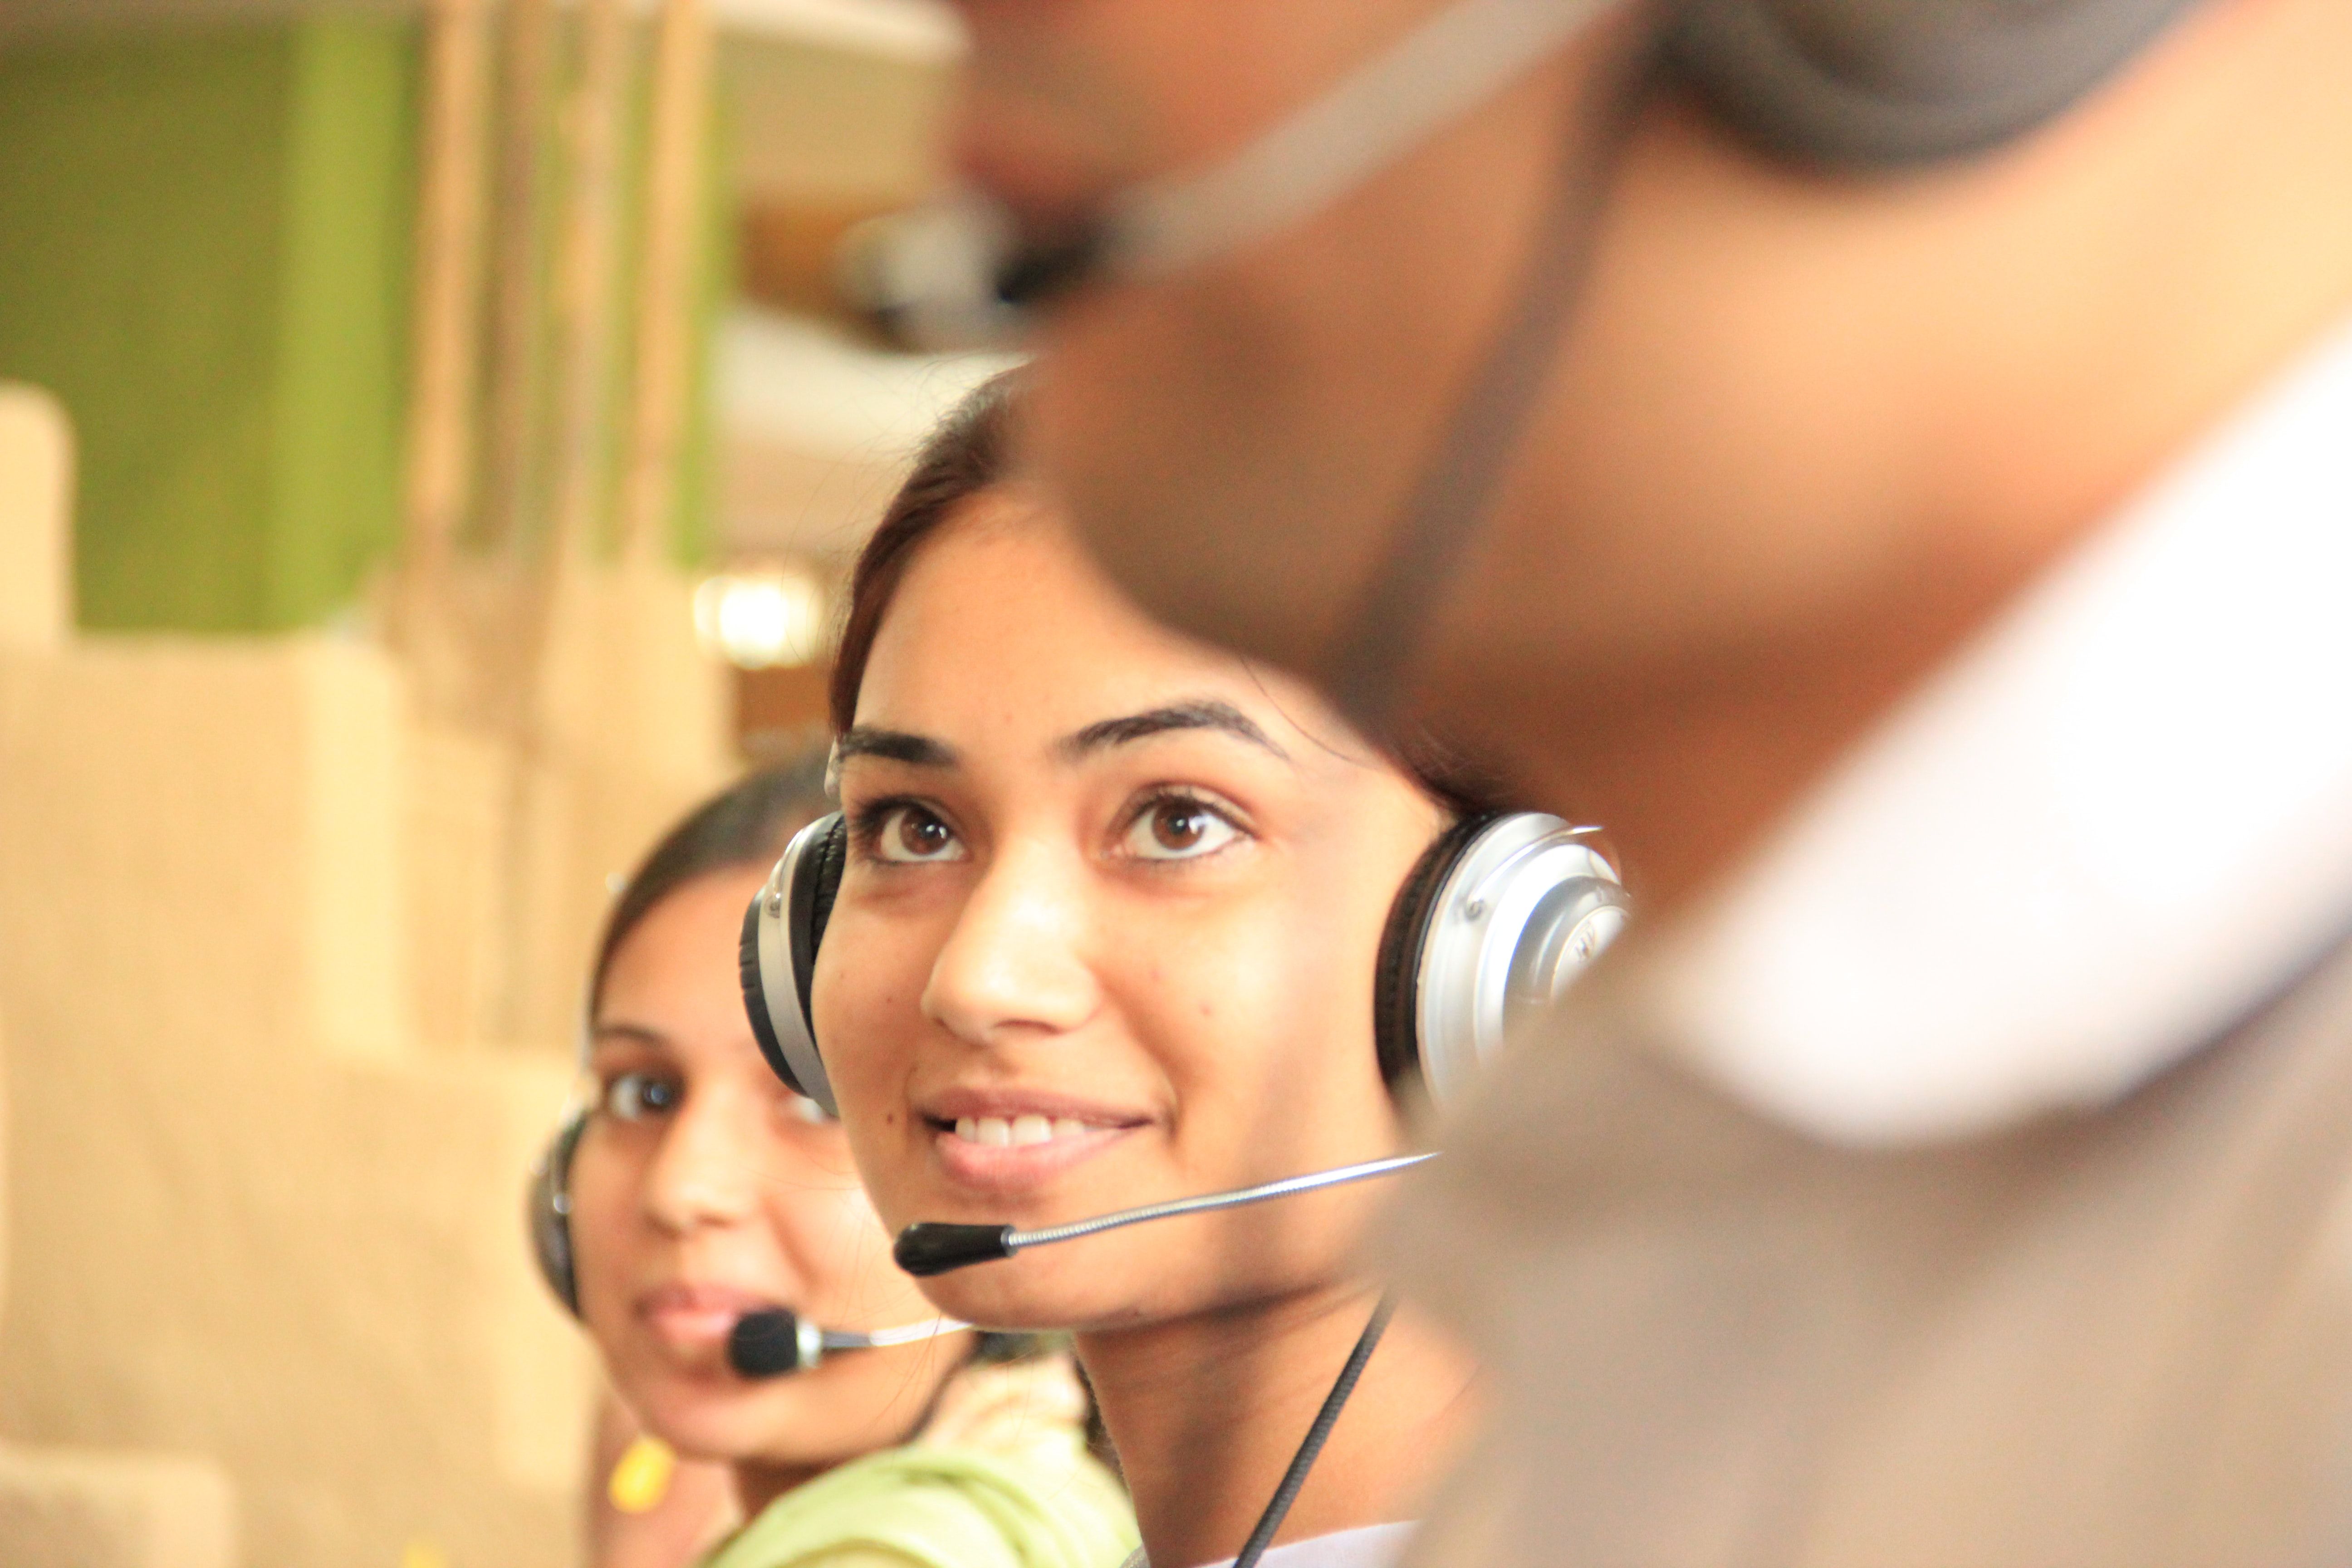 Three customer support representatives with headsets